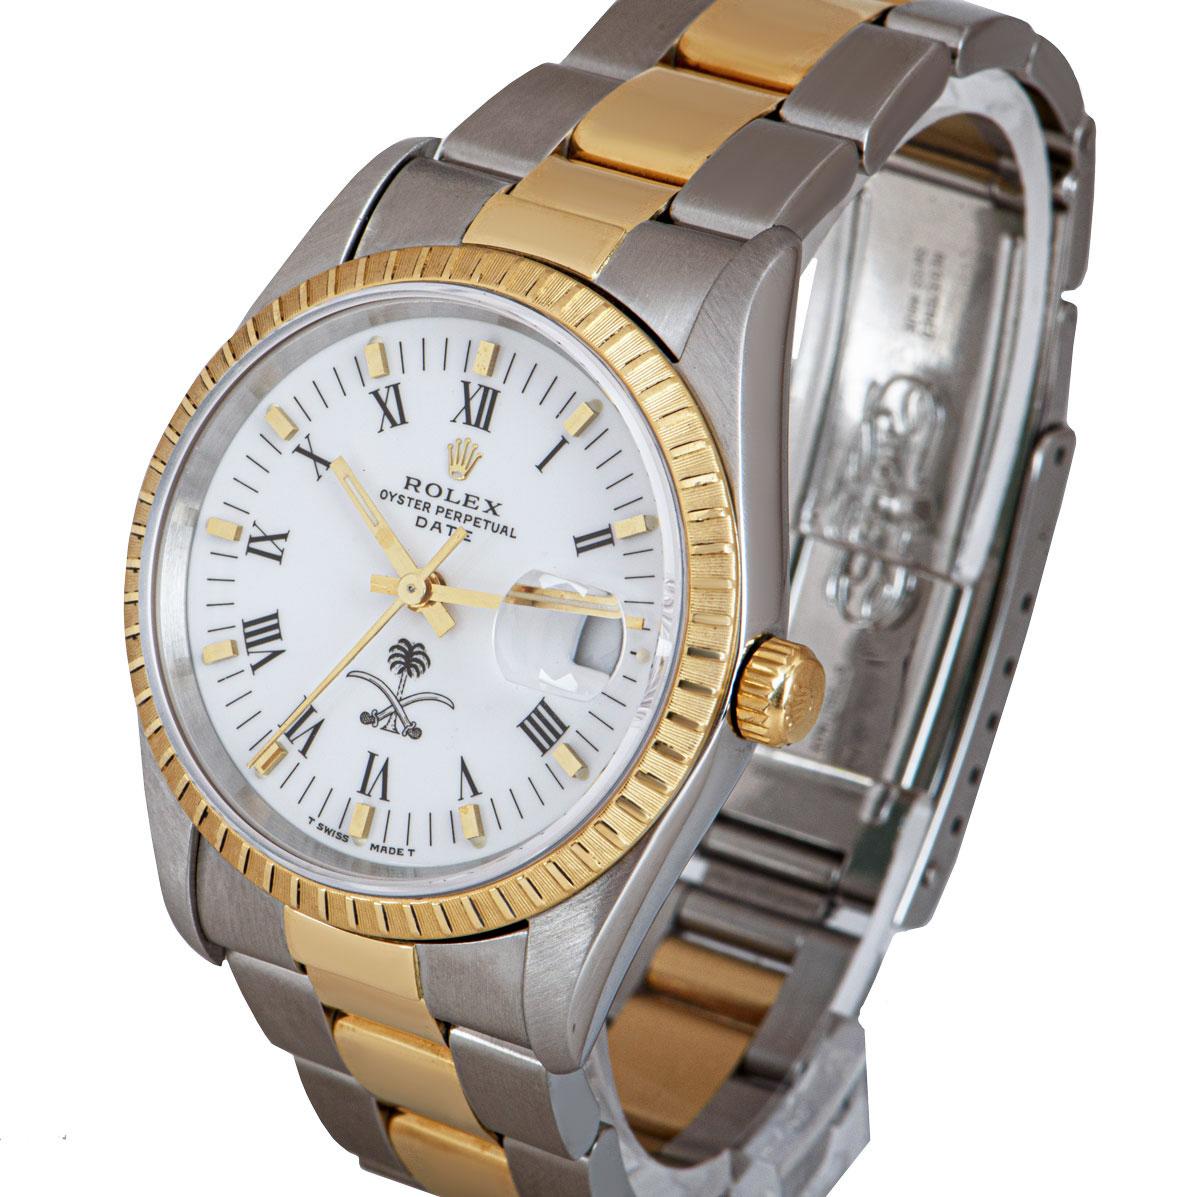 A 34 mm Stainless Steel and 18k Yellow Gold Oyster Perpetual Date Gents Wristwatch, white dial with roman numerals and applied hour markers, date at 3 0'clock, rare emblem of Saudi Arabia at 6 0'clock, a fixed 18k yellow gold engine turned bezel, a